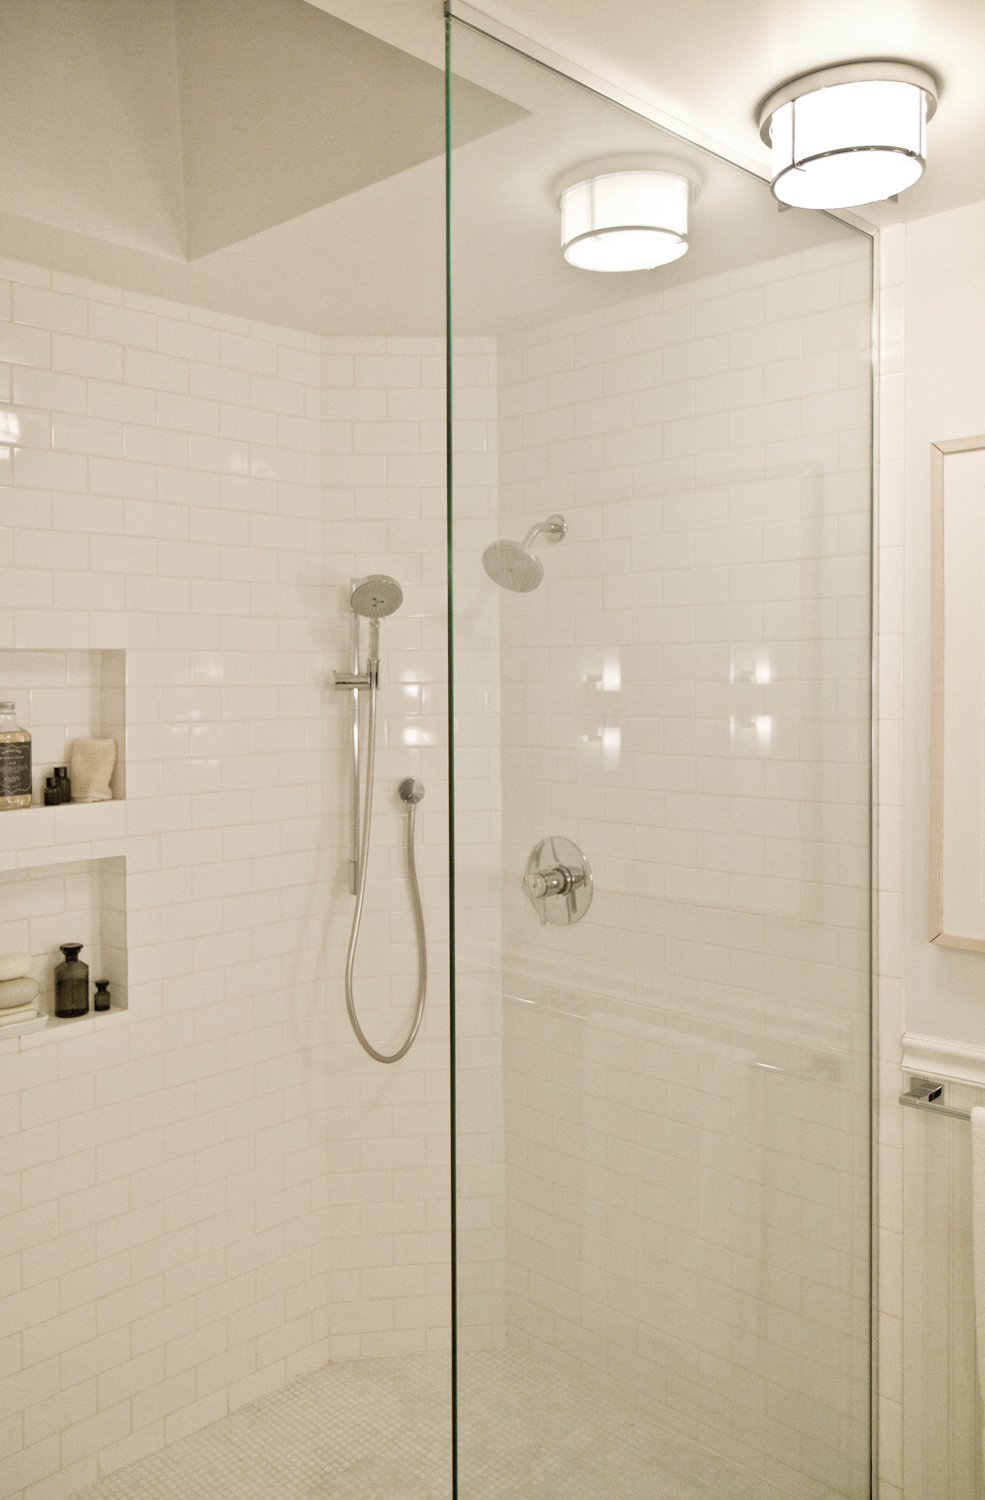 bathroom showers with subway tiles